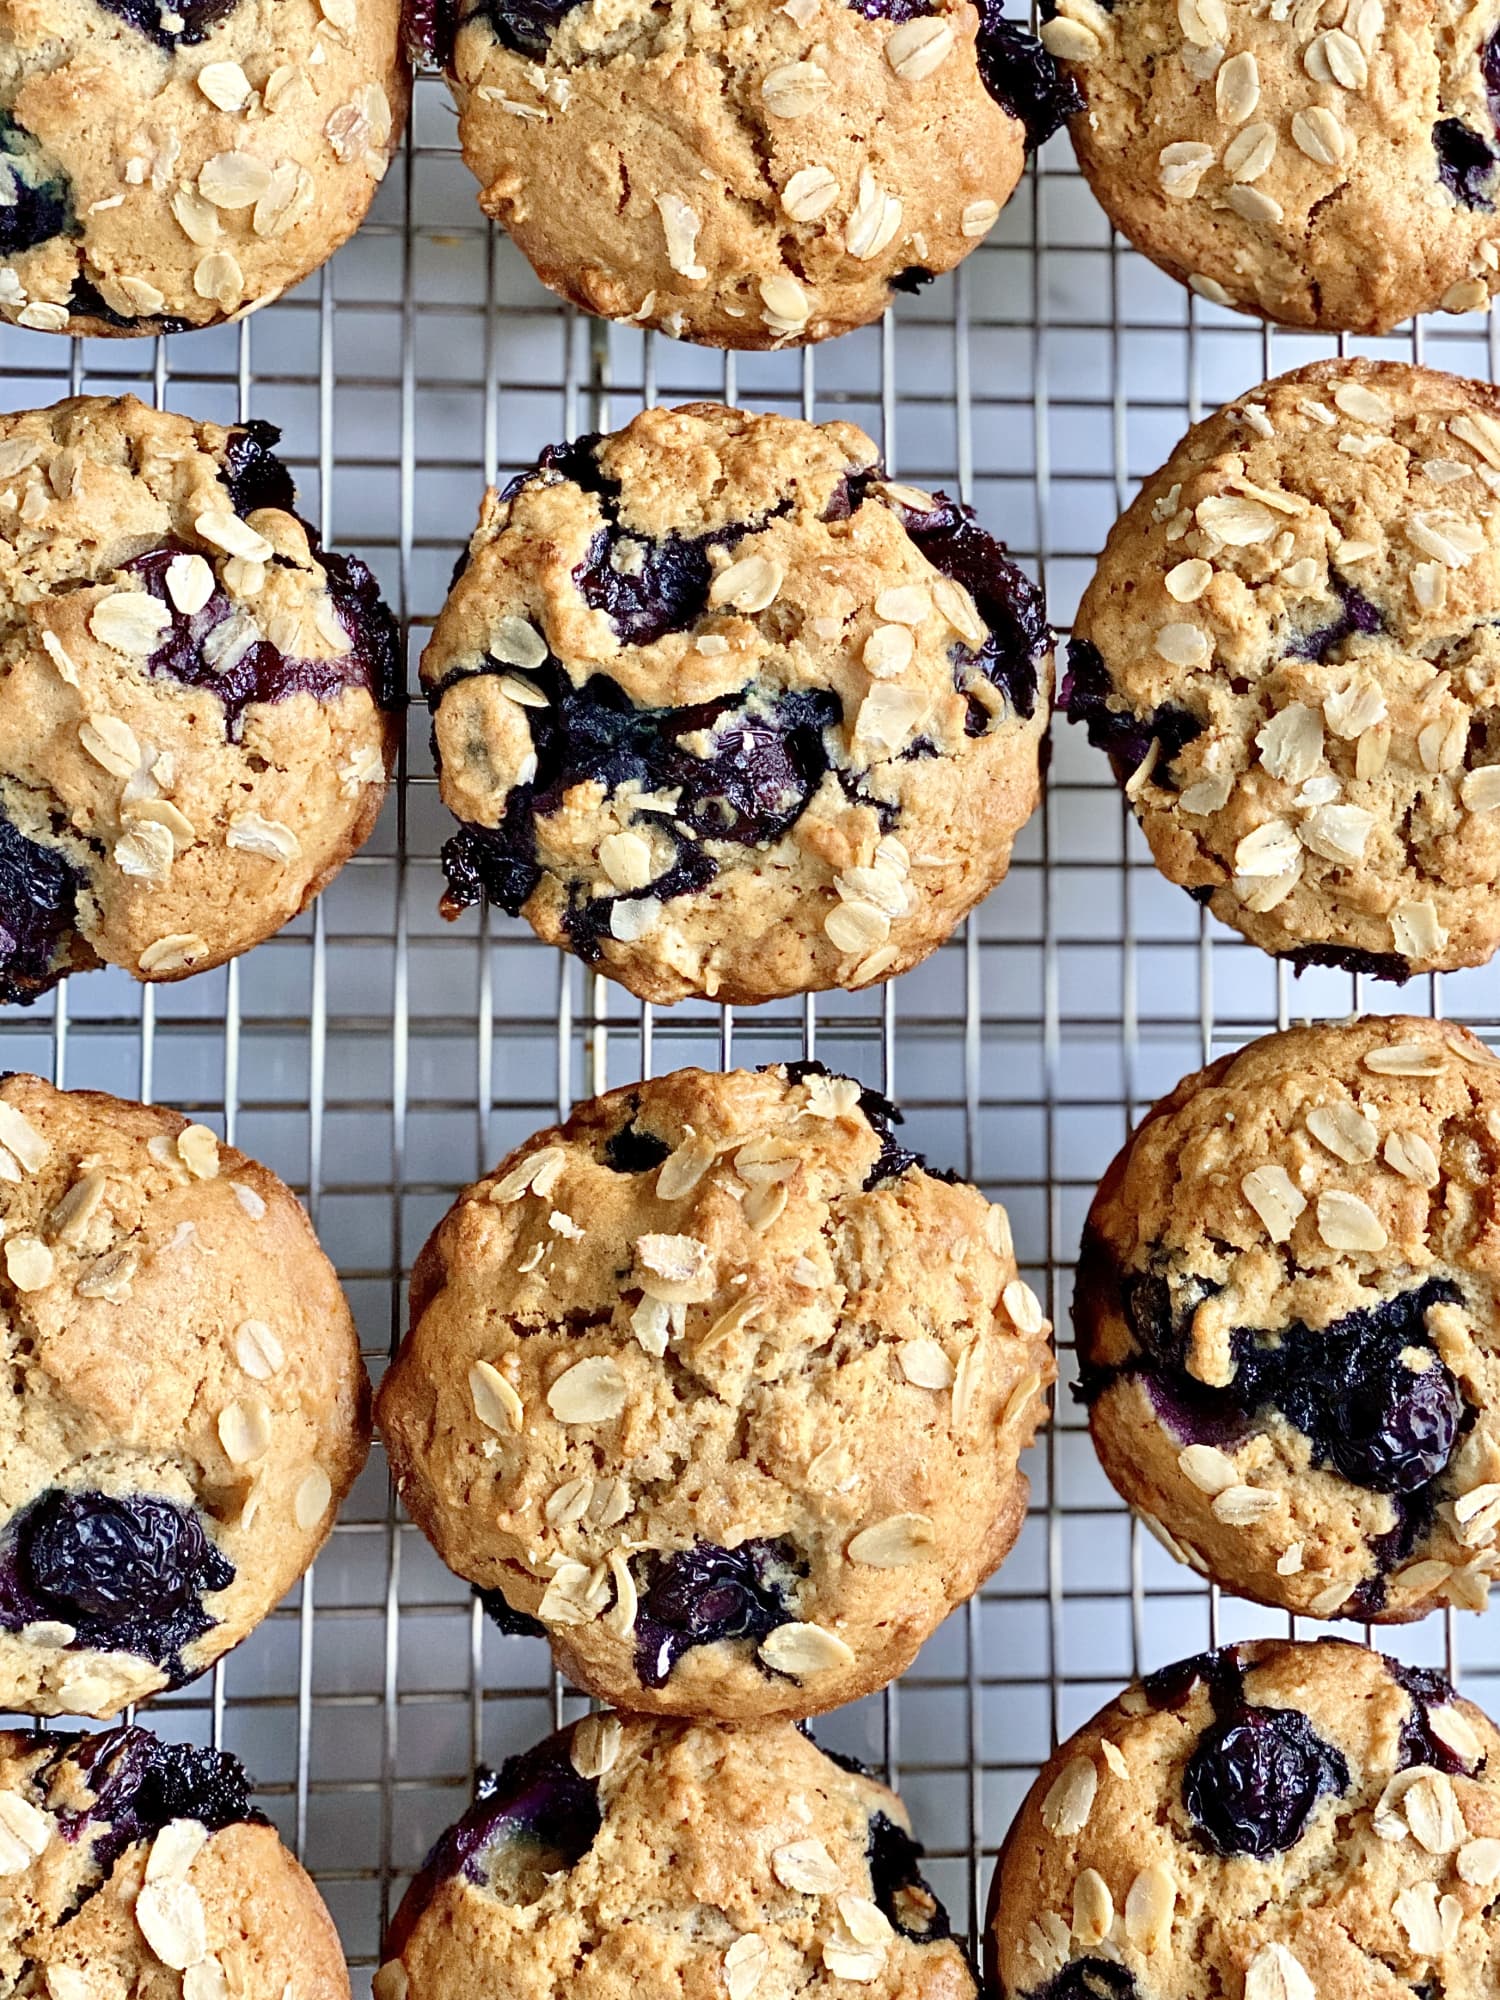 Blueberry Oatmeal Muffins Stay Moist with One Little Trick